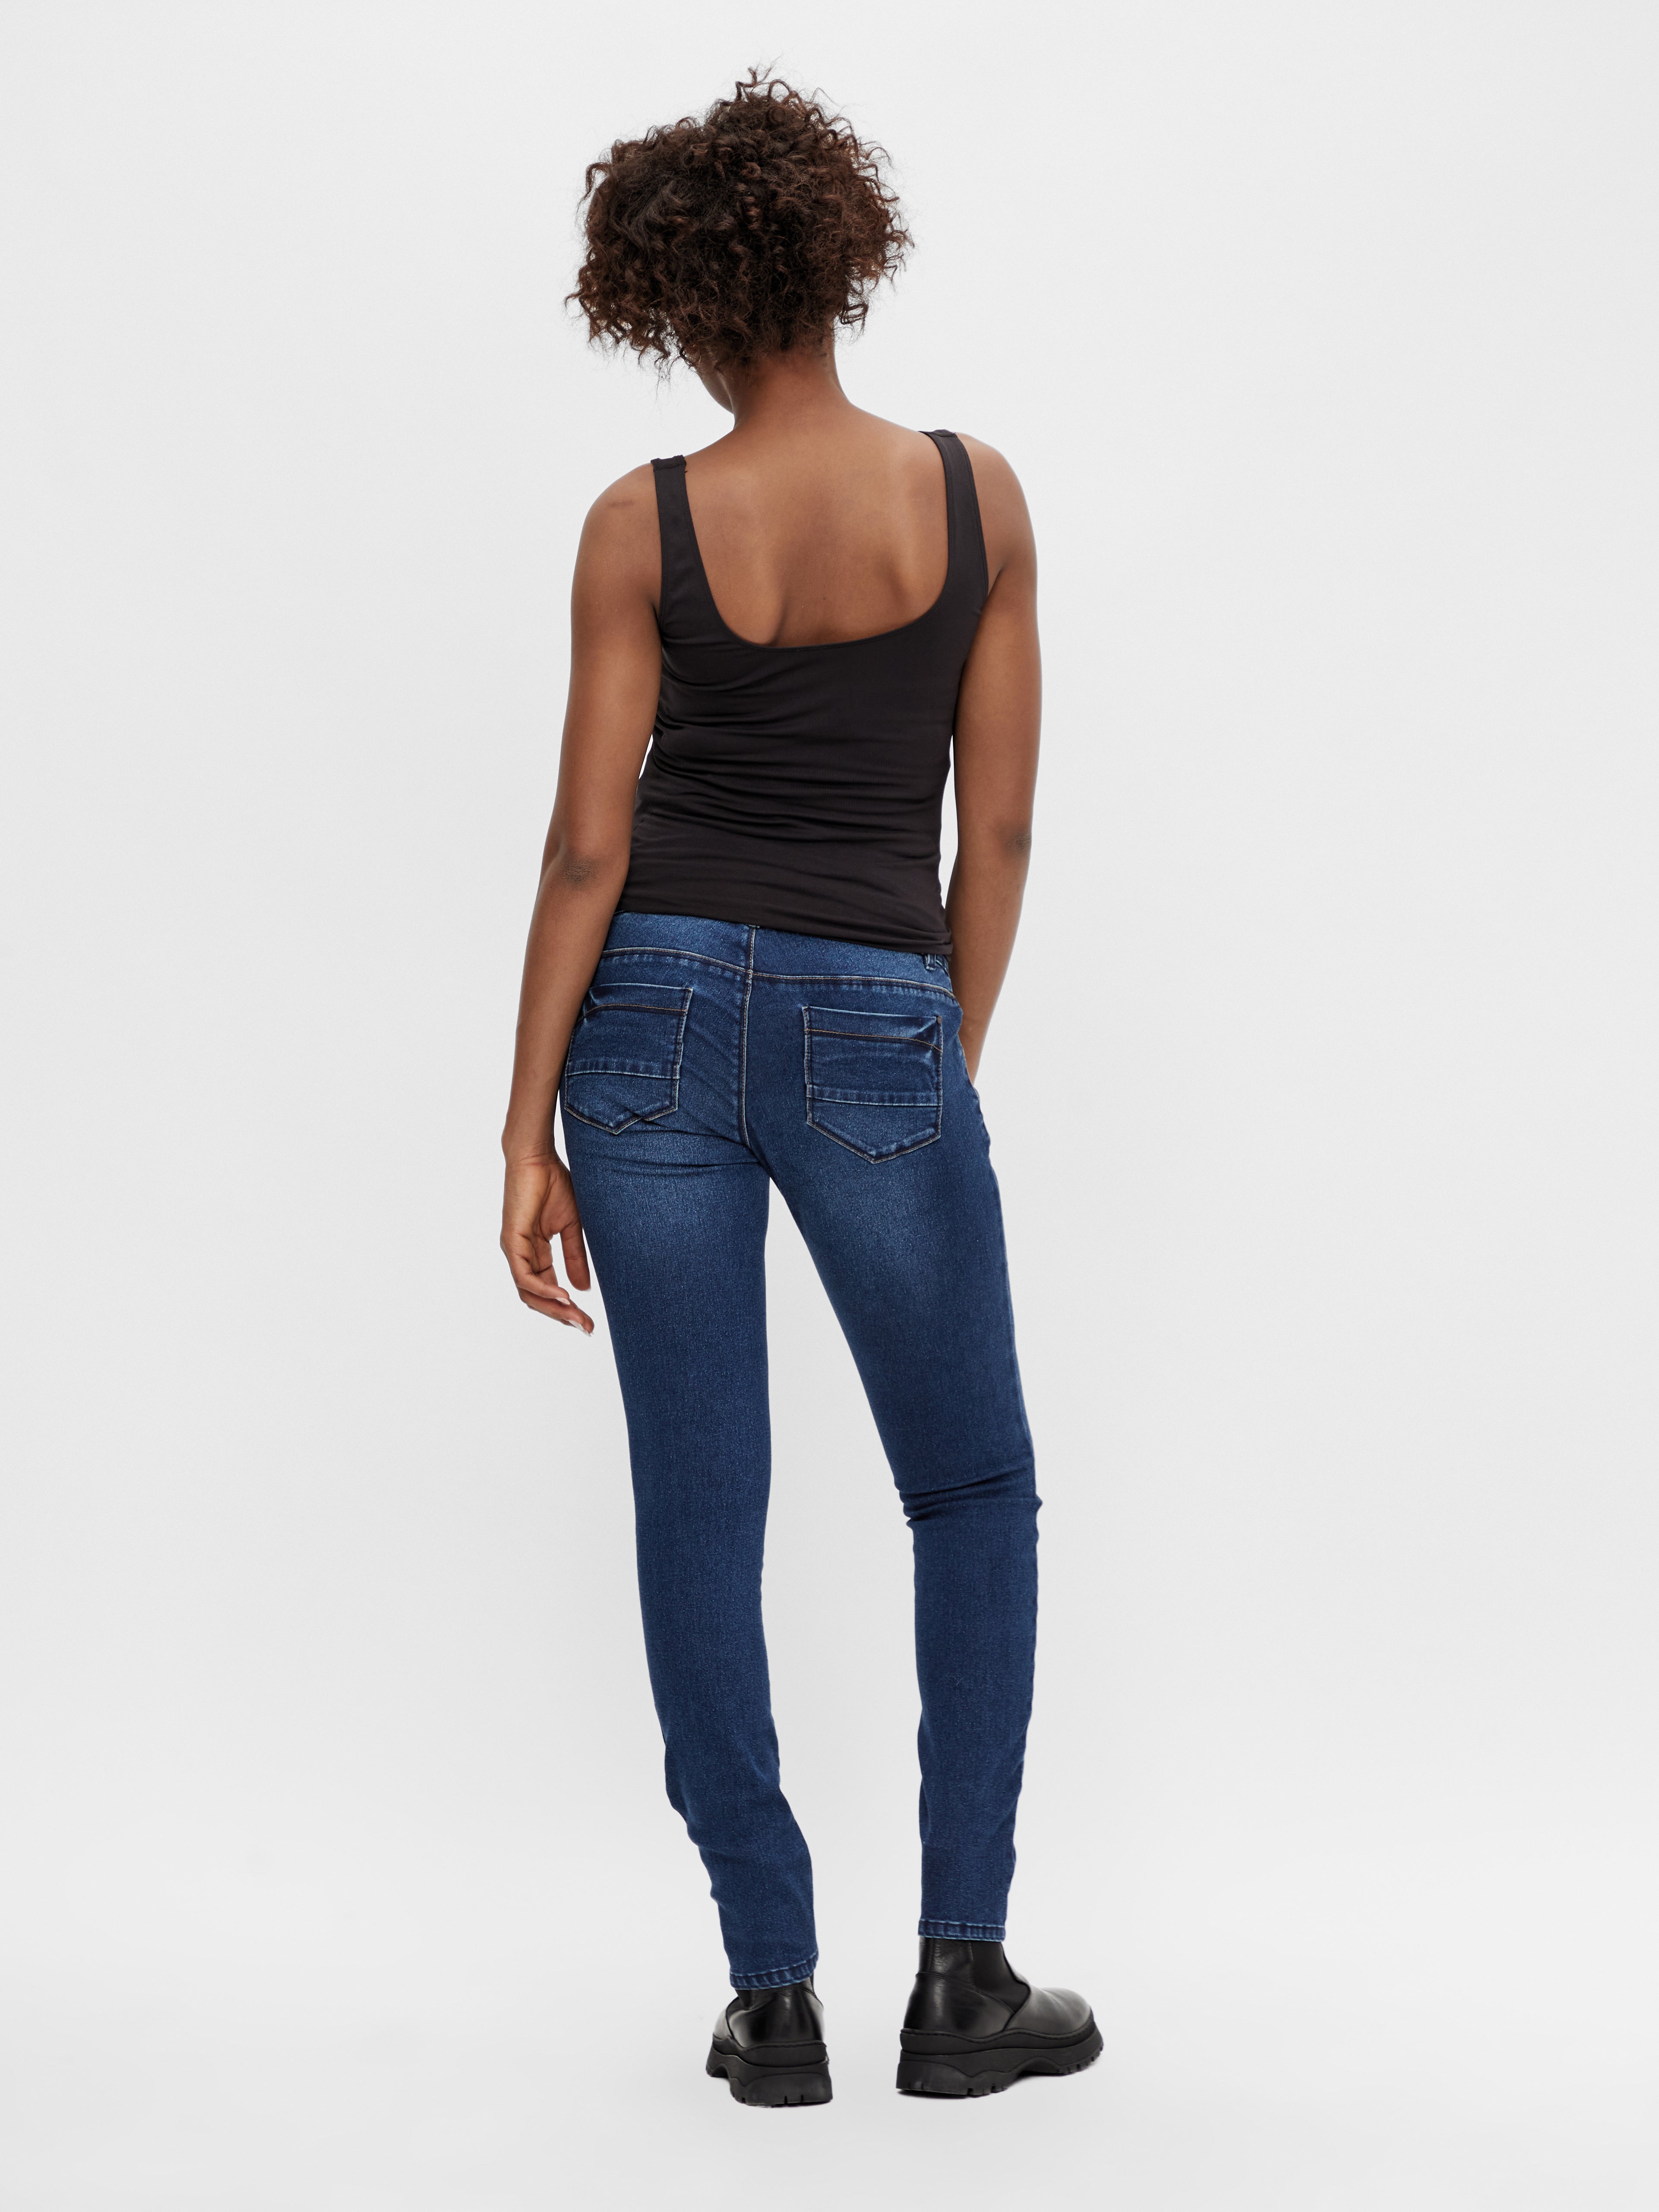 Slim Jeans Fit discount! 20% with